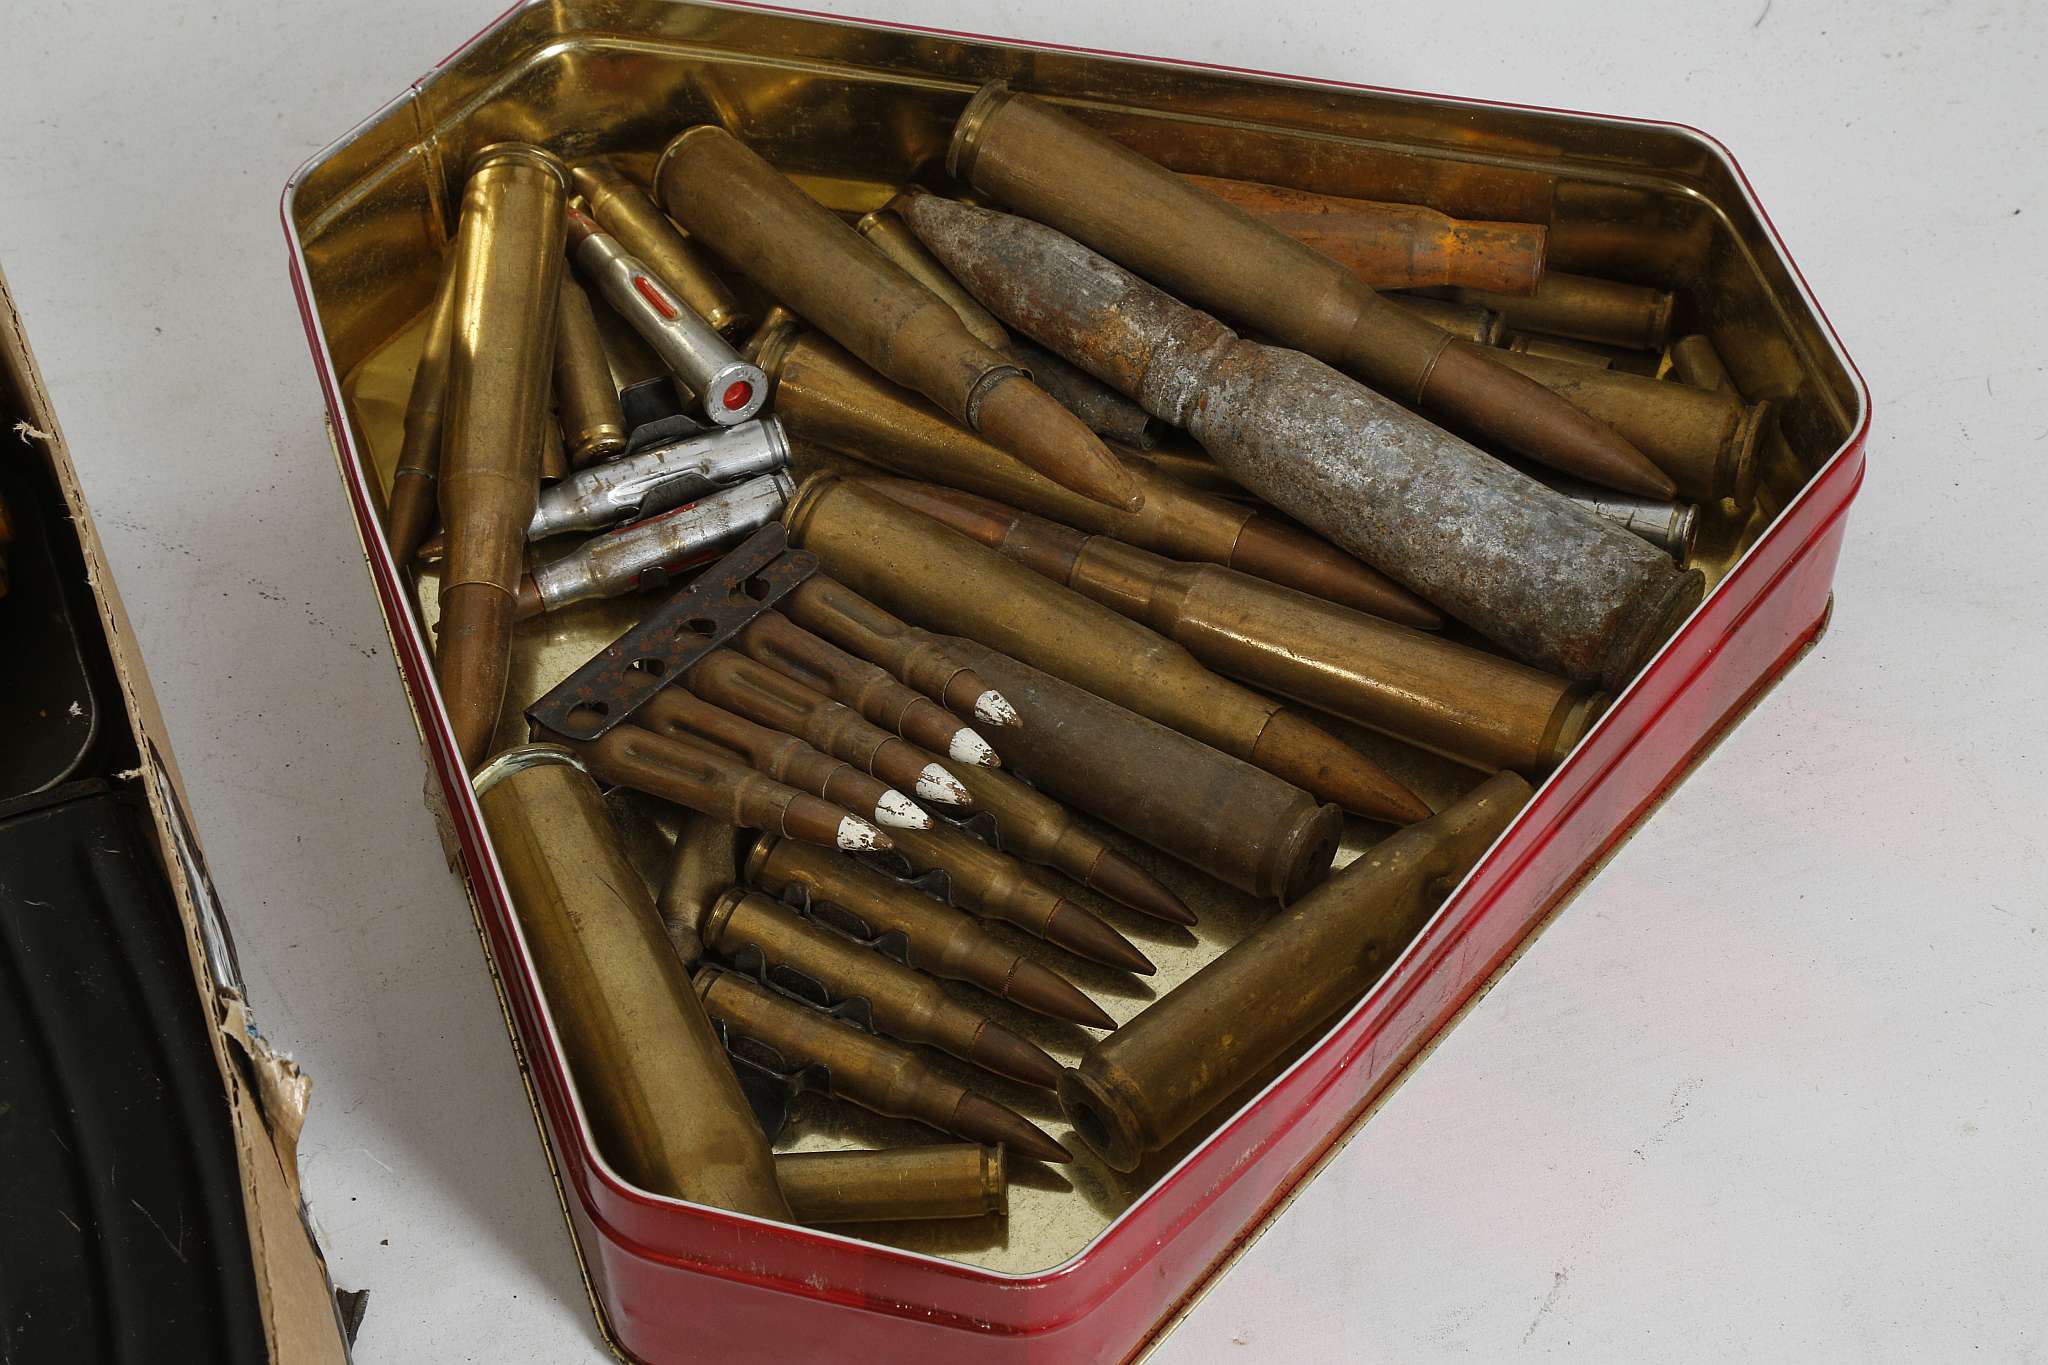 A COLLECTION OF RIFLE AND MACHINE GUN MAGAZINES, cleaning kits for personal weapons and spent - Image 3 of 3